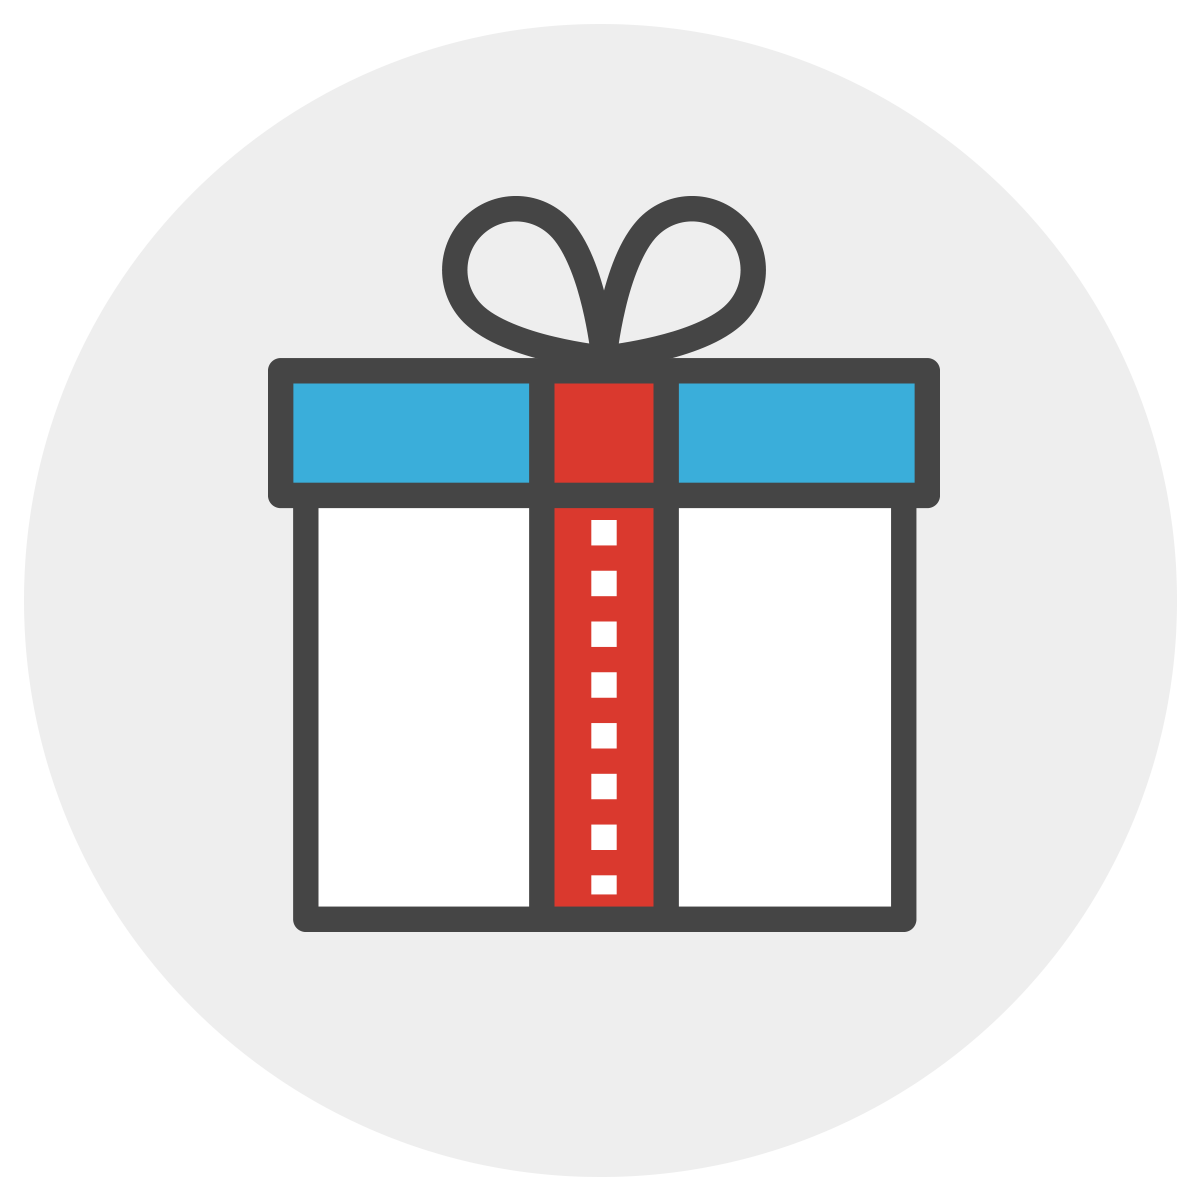 Gift Subscriptions